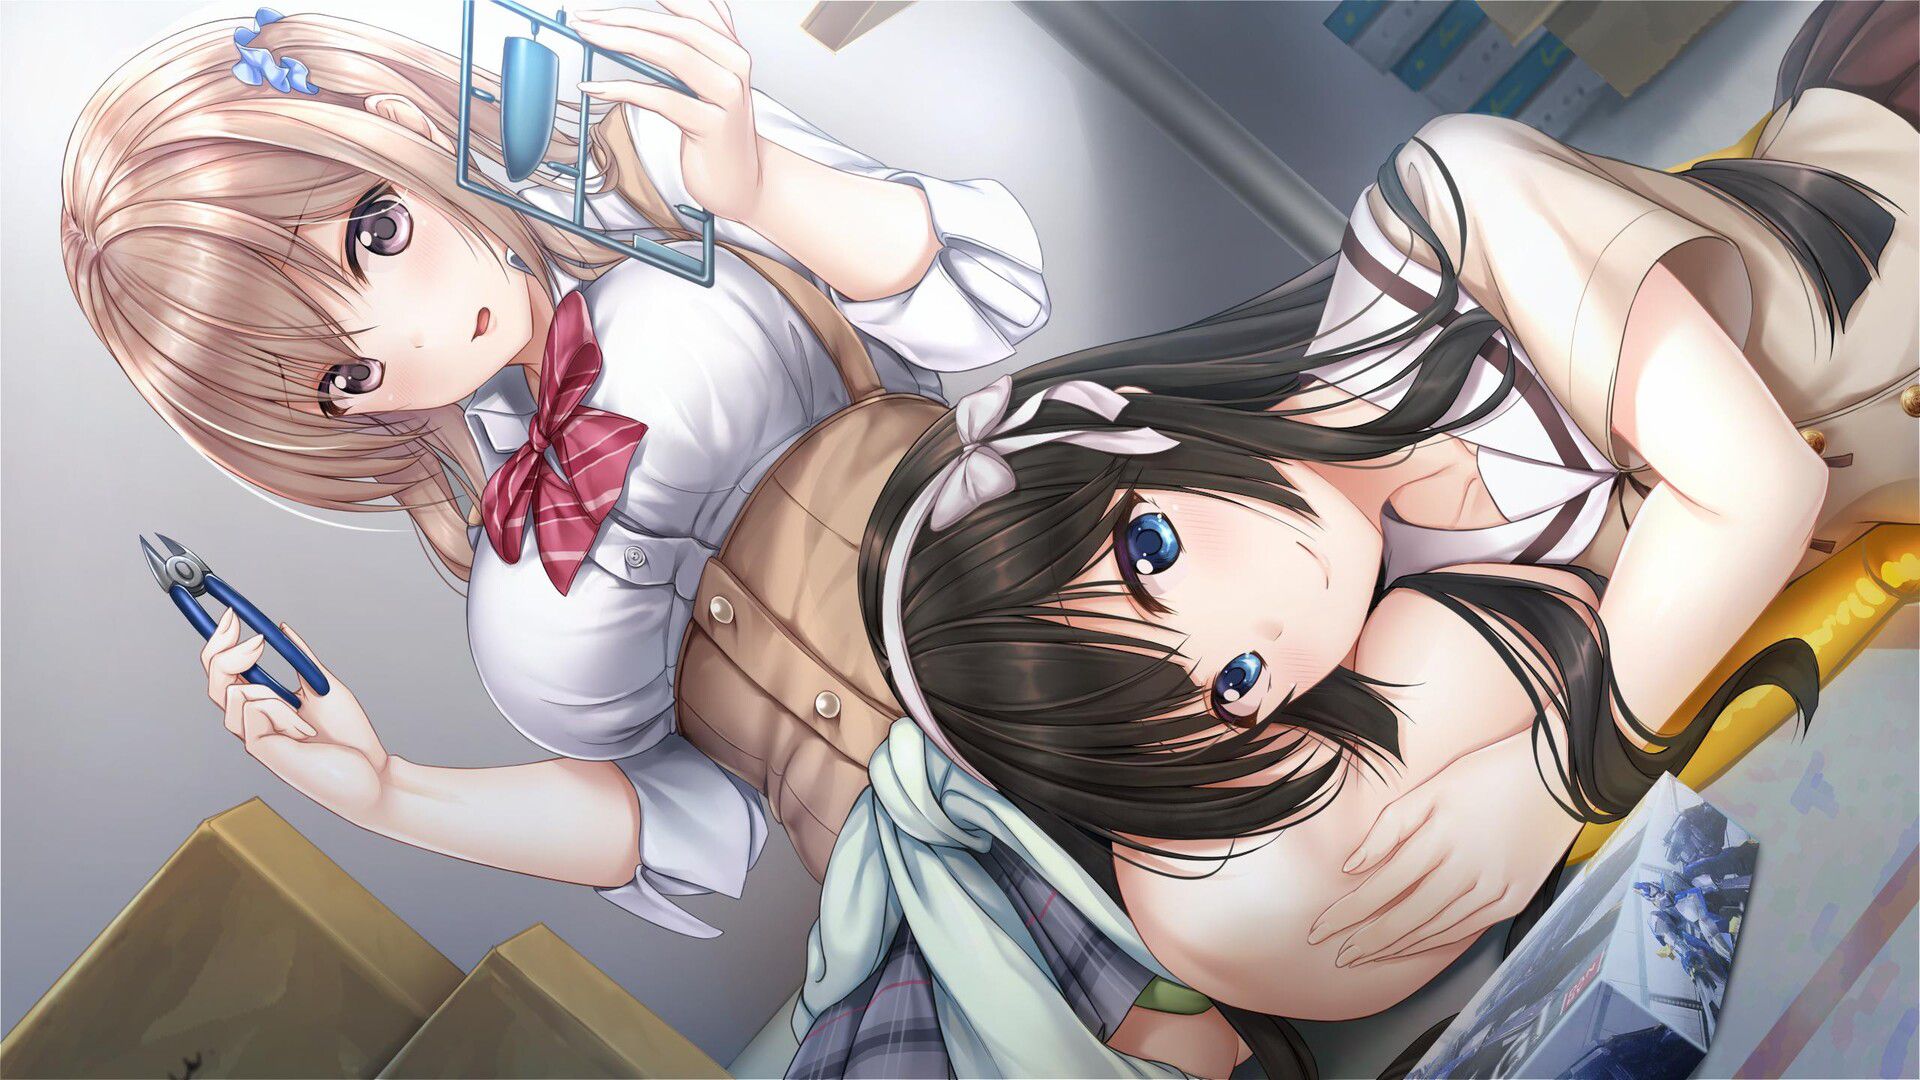 PS4 / switch version [Aikis 2] erotic event CG such as girl's skirt raise and swimsuit 7